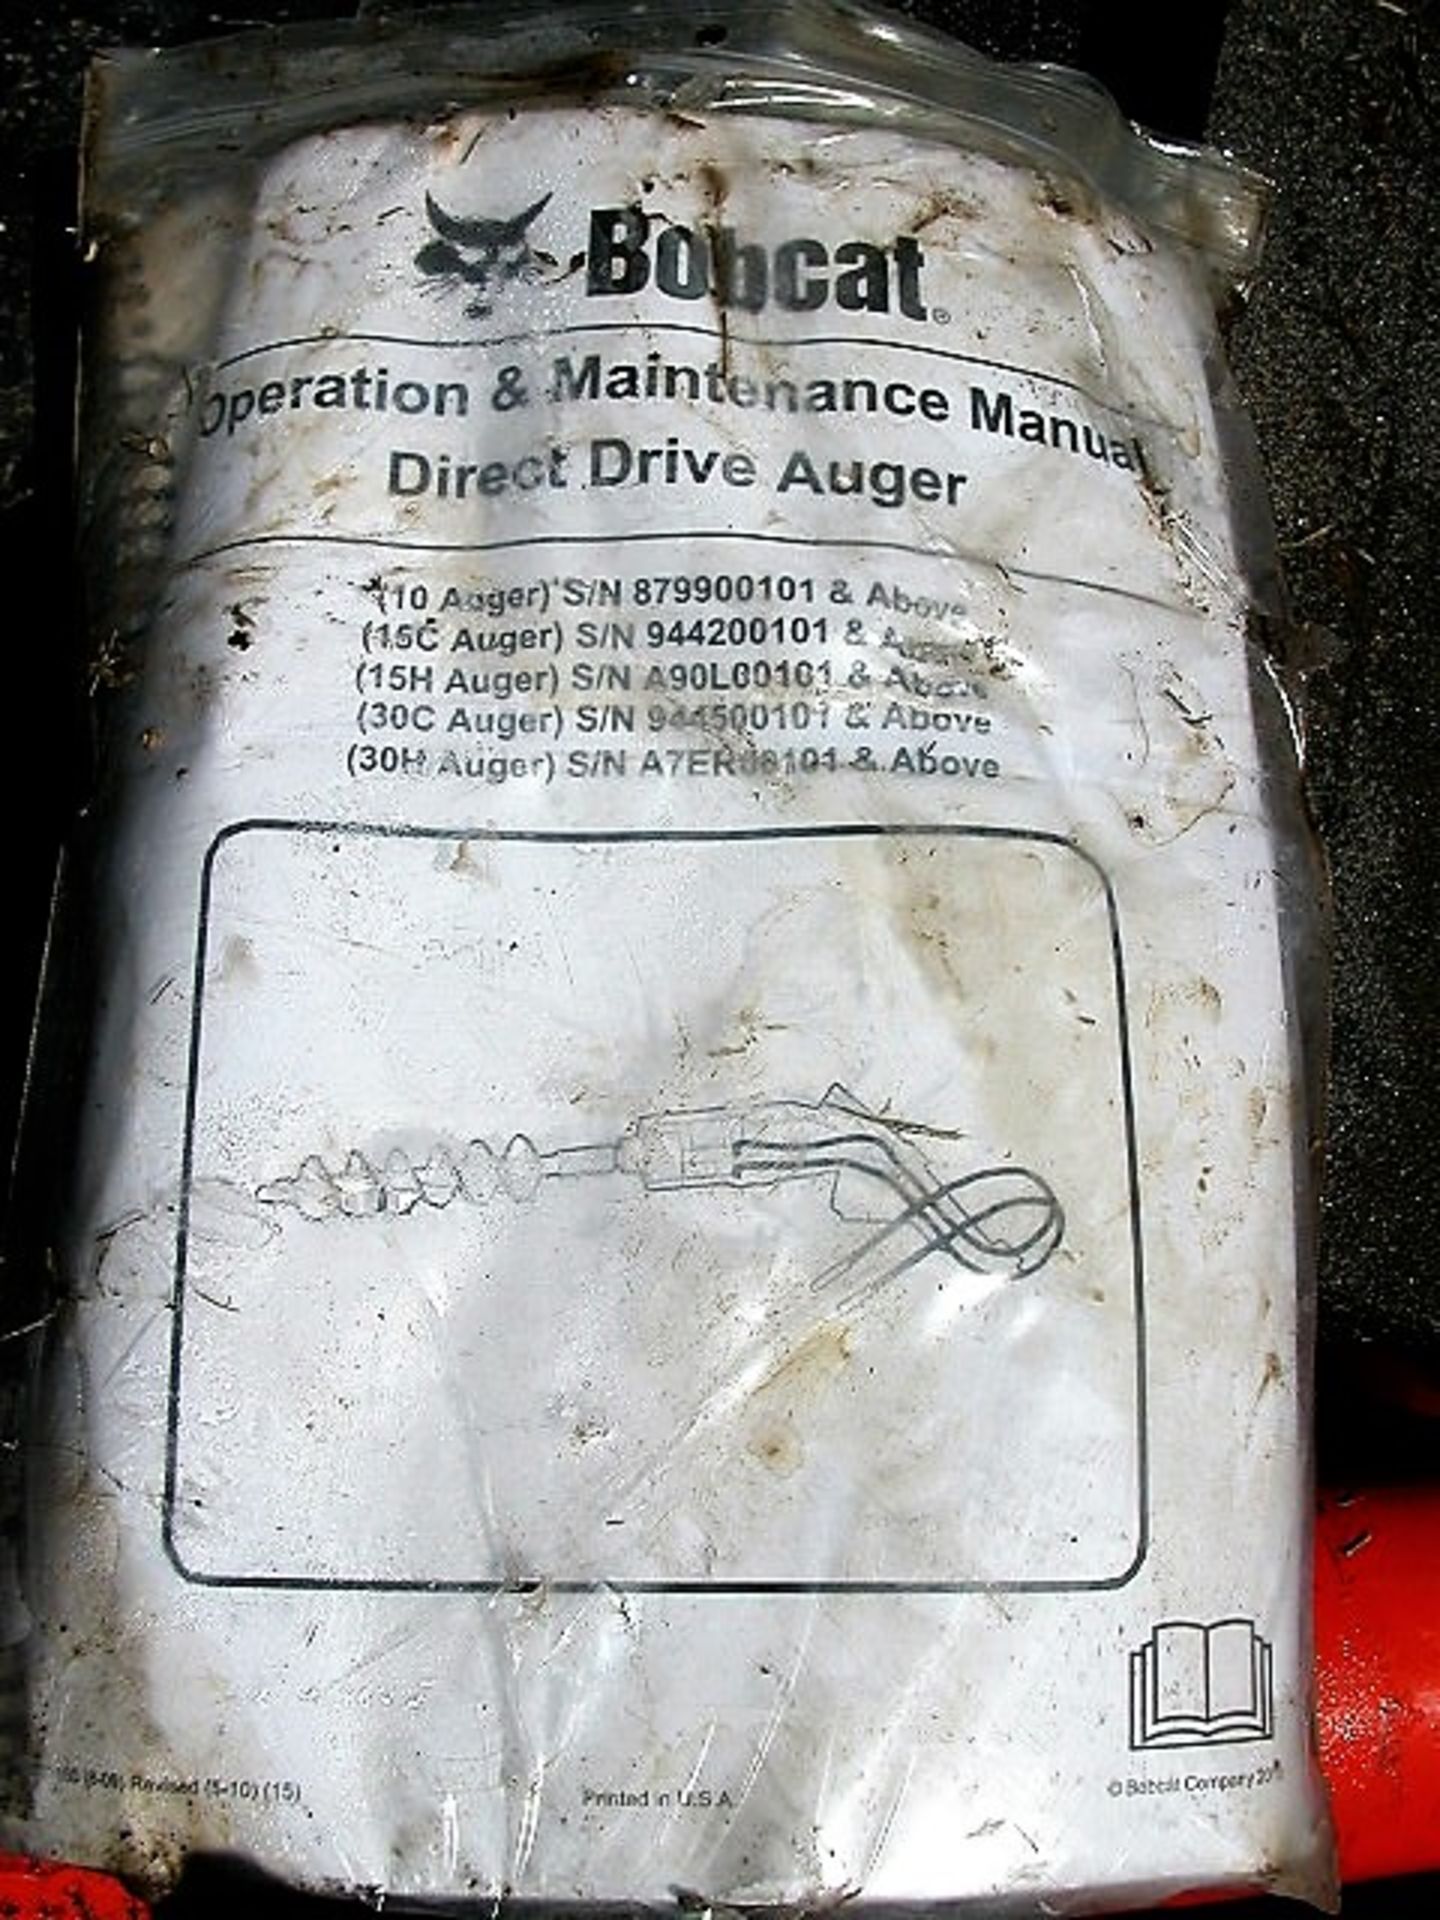 NEW in Crate - BOBCAT Direct Drive Auger System - NEVER USED! - Image 5 of 5